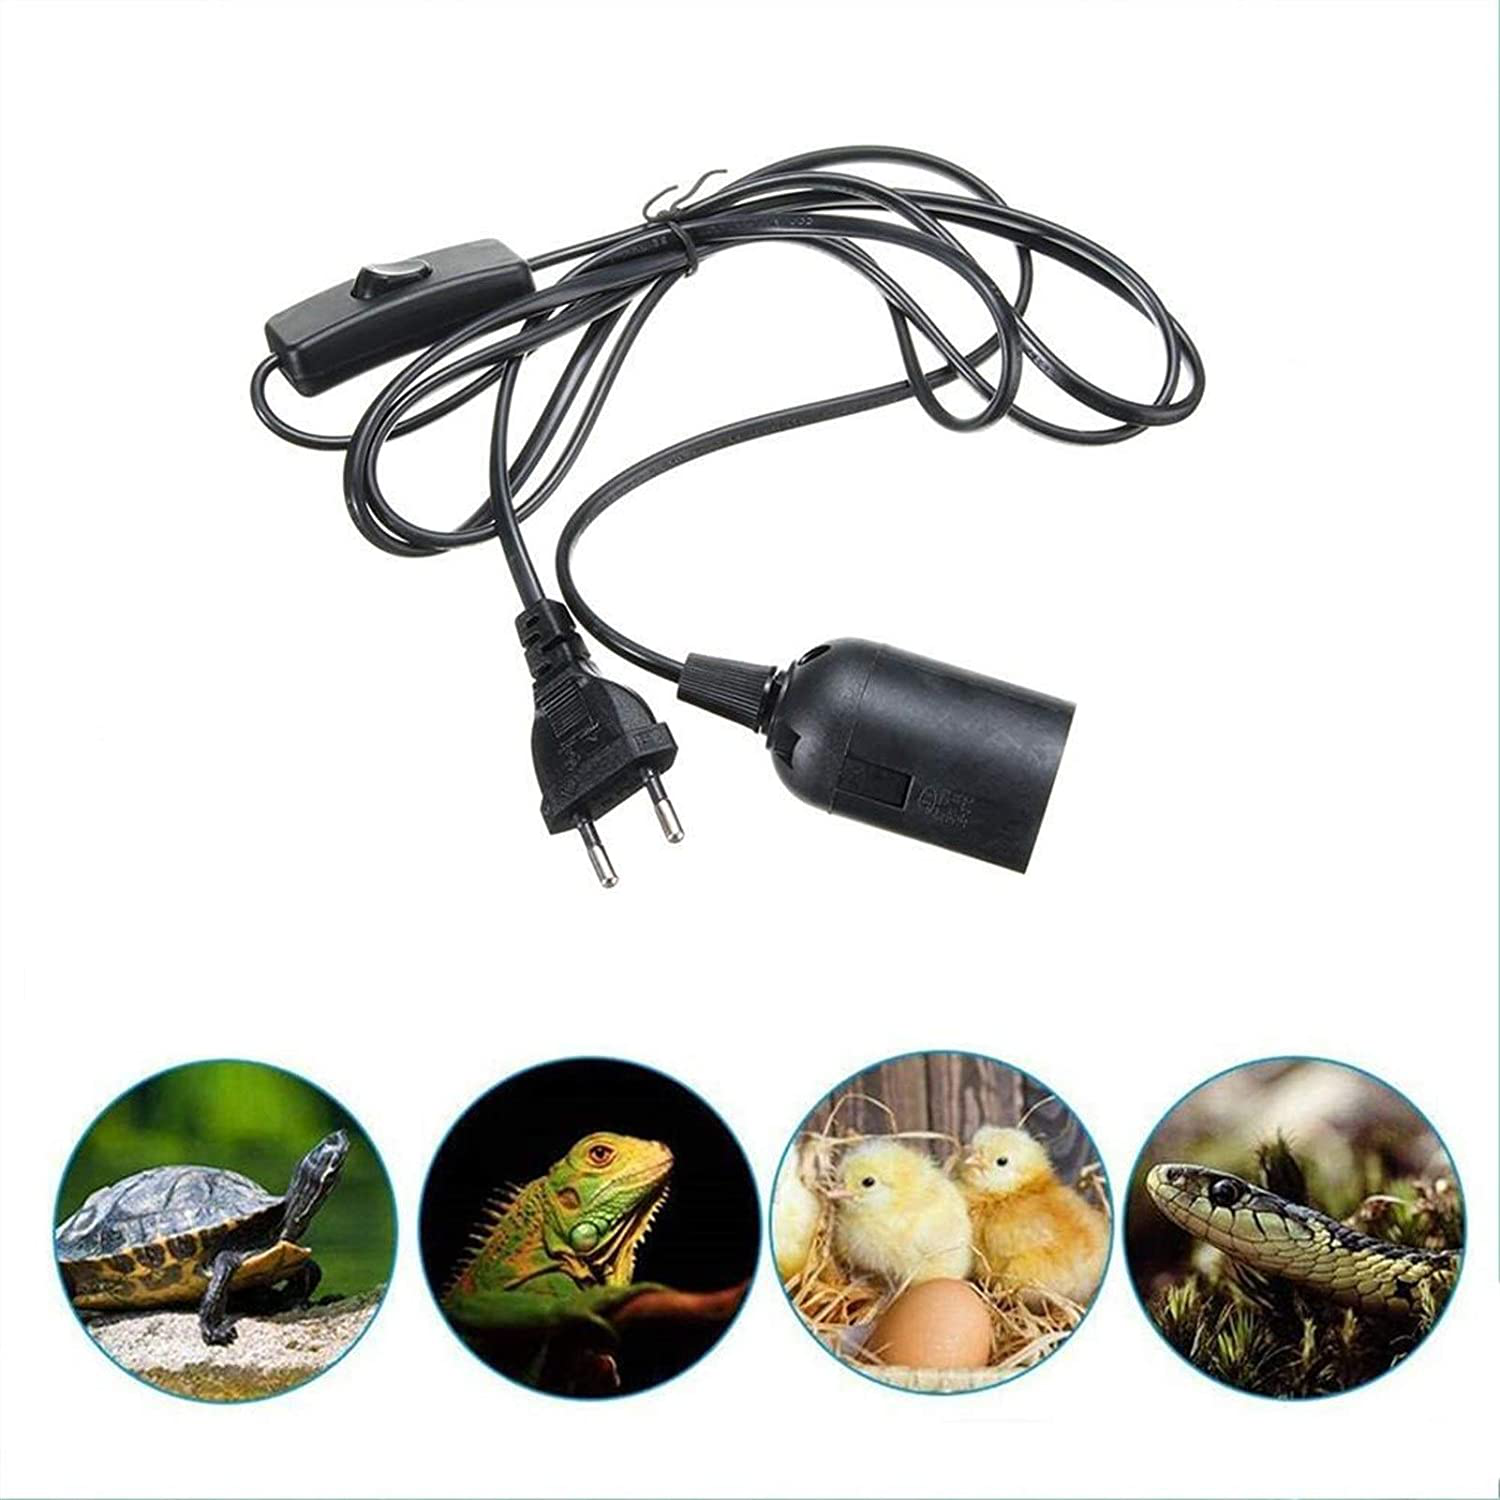 MING-BIN Pet Heating Heating Lamp Lamp Holder Switch Plug Reptile Chicken and Duck Heating Lamp Holder EU Animal Warm Keeping Lamp Holder Animals & Pet Supplies > Pet Supplies > Reptile & Amphibian Supplies > Reptile & Amphibian Habitat Heating & Lighting HXY2020   